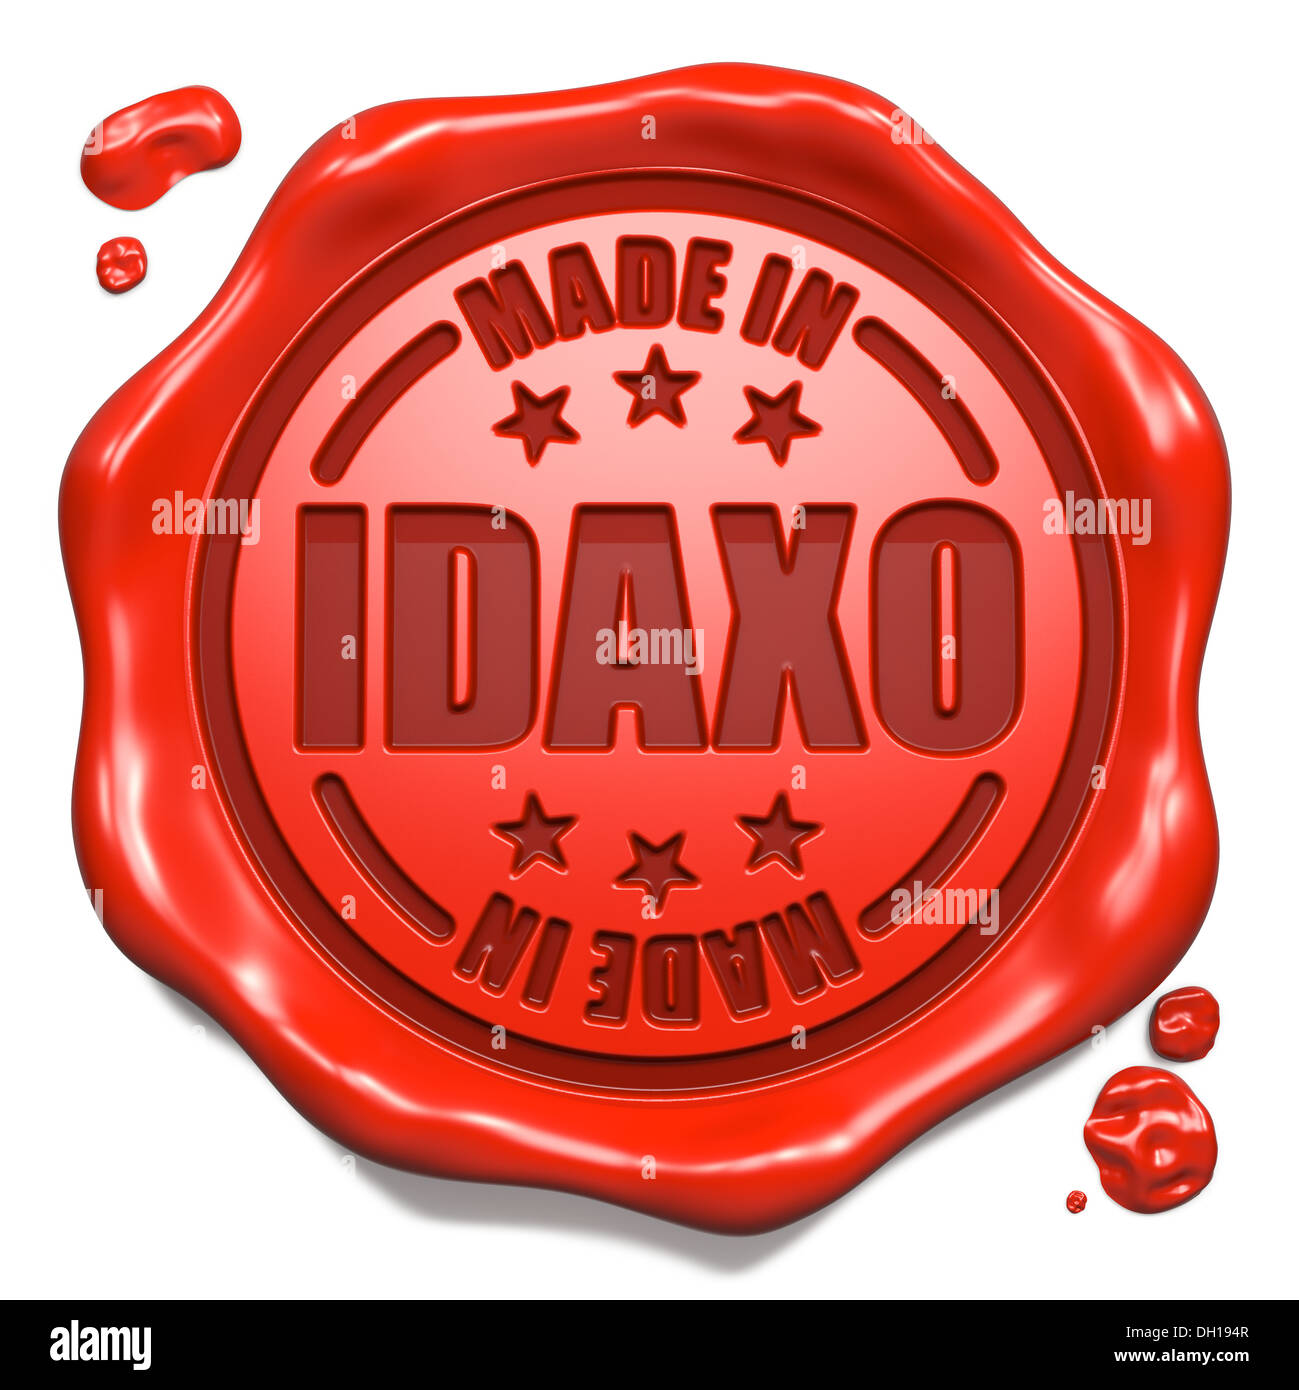 Made in Idaxo - Stamp on Red Wax Seal. Stock Photo